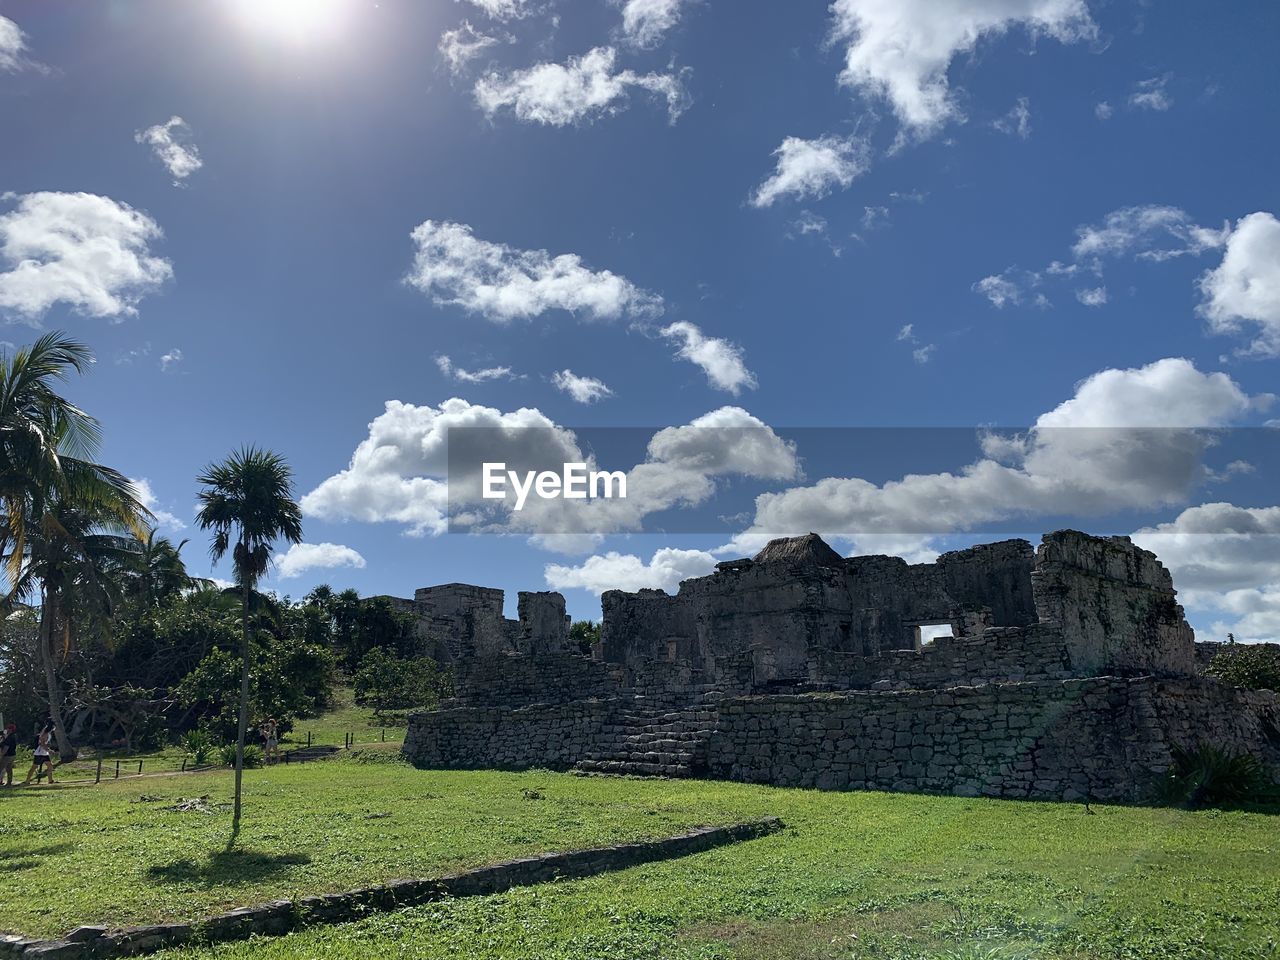 sky, plant, cloud, nature, architecture, tree, hill, travel destinations, landscape, environment, history, land, grass, travel, rural area, the past, ruins, no people, scenics - nature, tourism, built structure, ancient, outdoors, green, beauty in nature, sunlight, field, old ruin, building, day, blue, tranquility